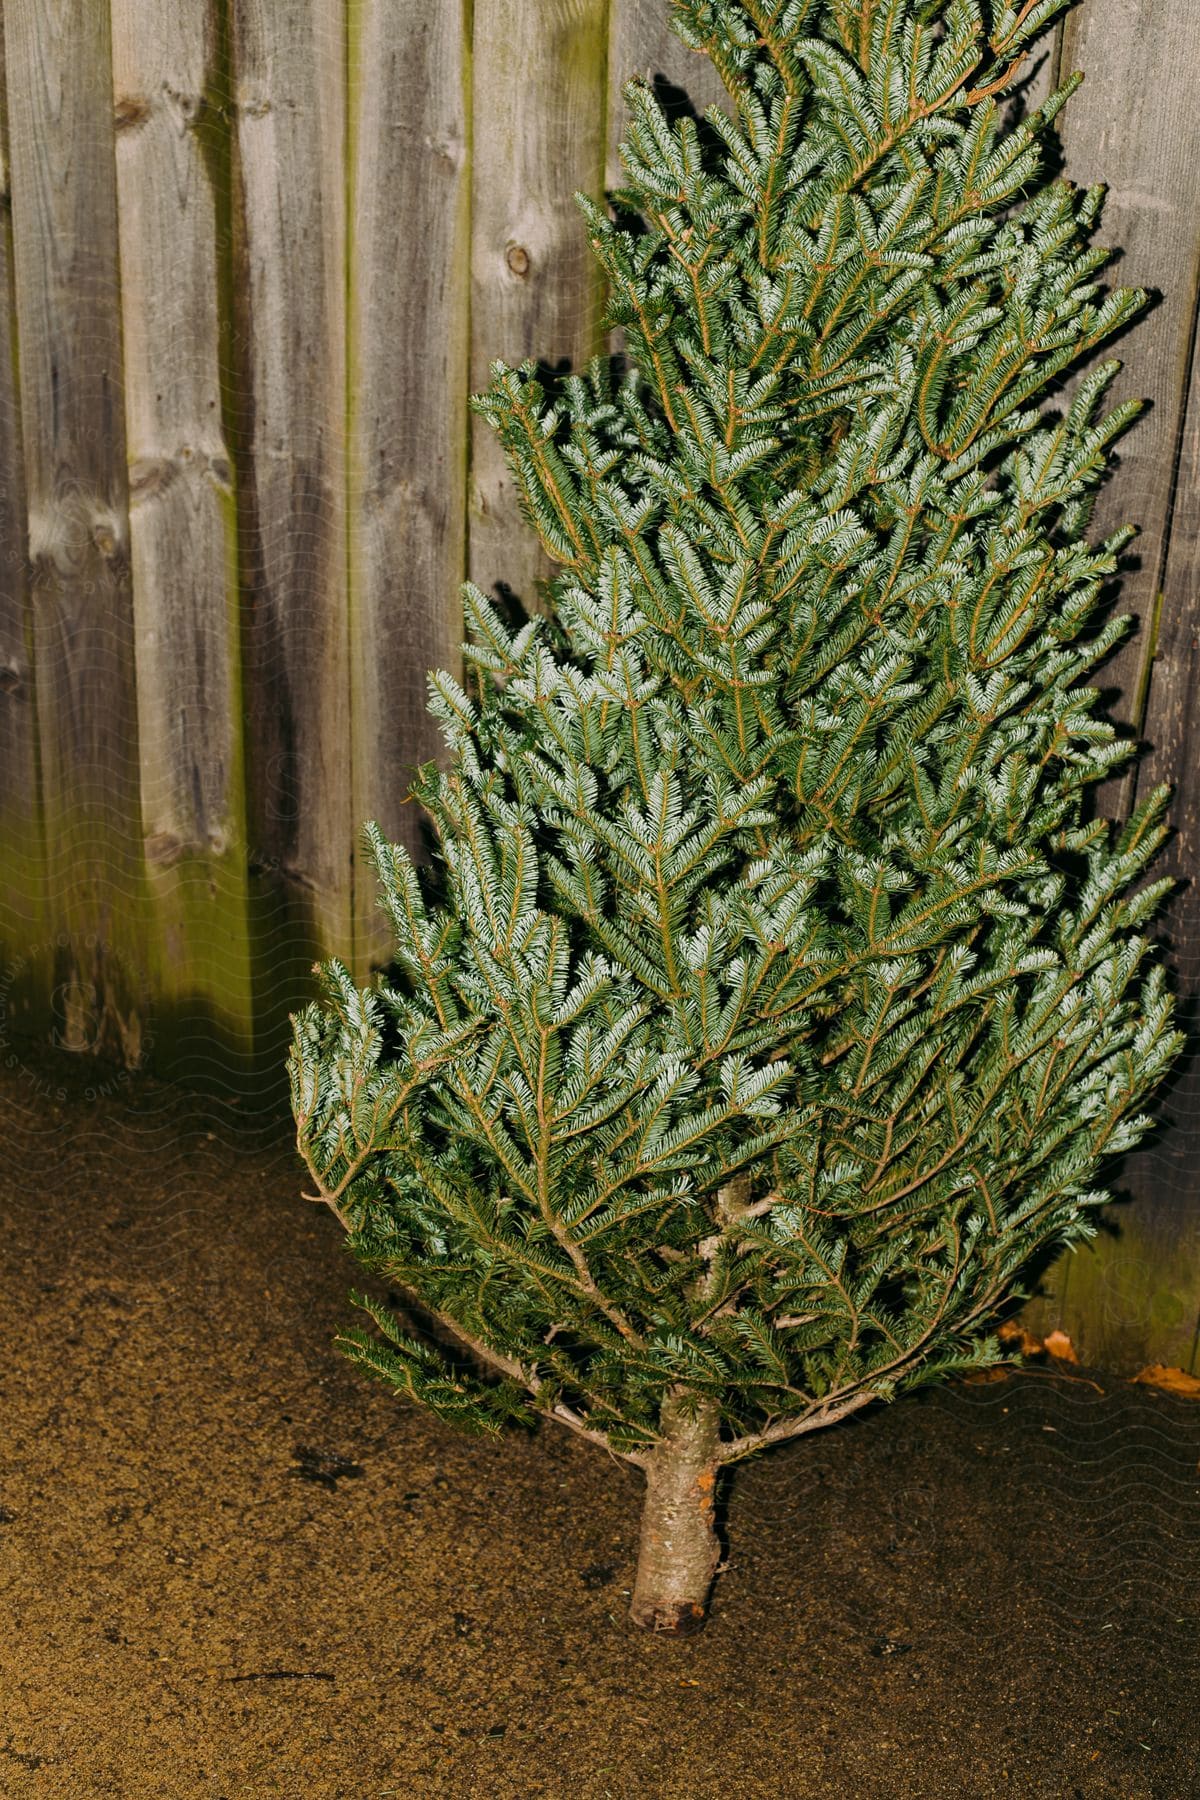 A Christmas tree leans against a wooden fence